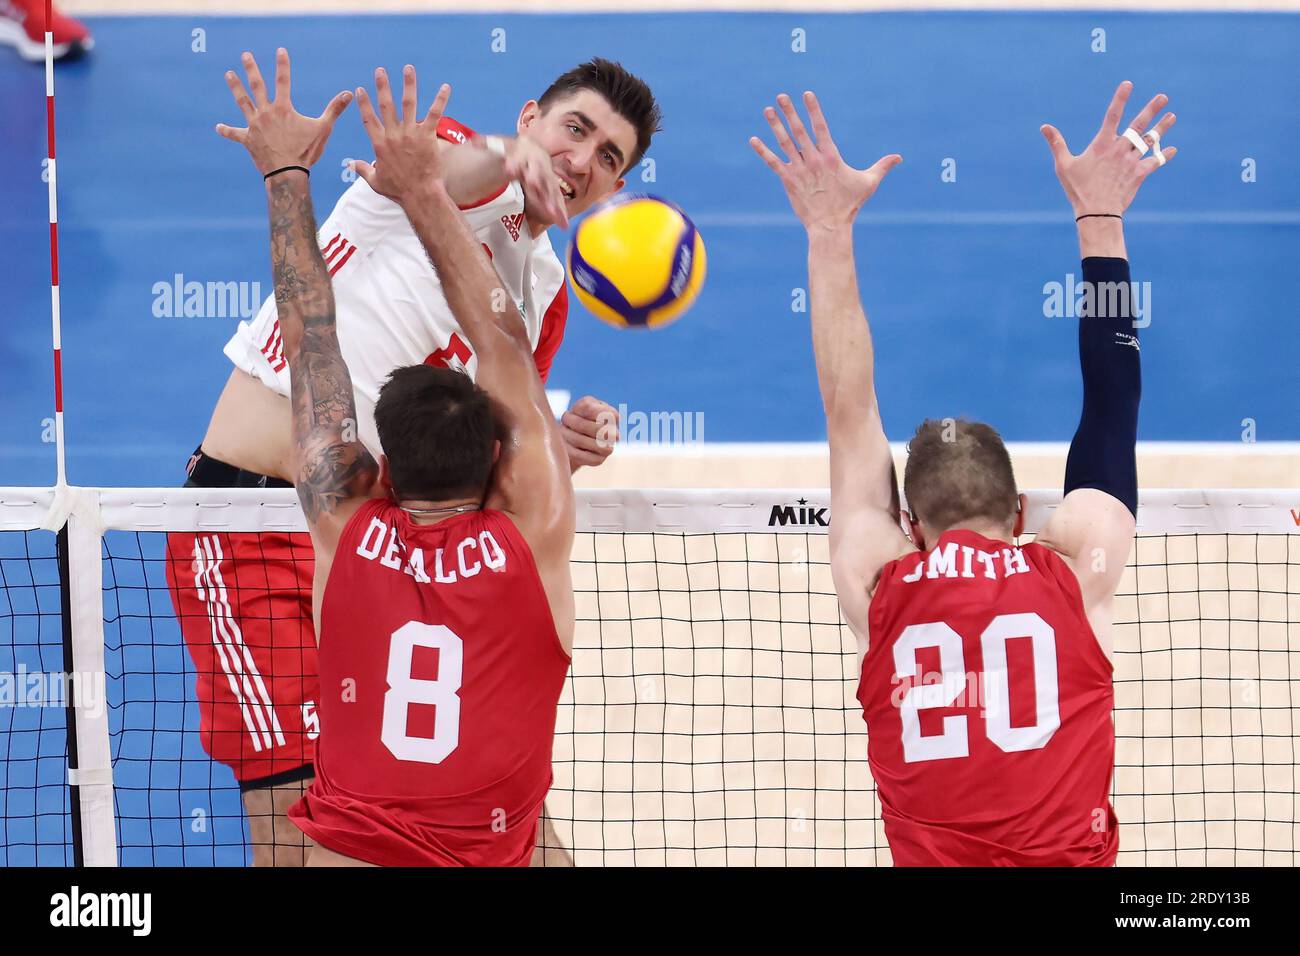 fivb volleyball mens nations league live